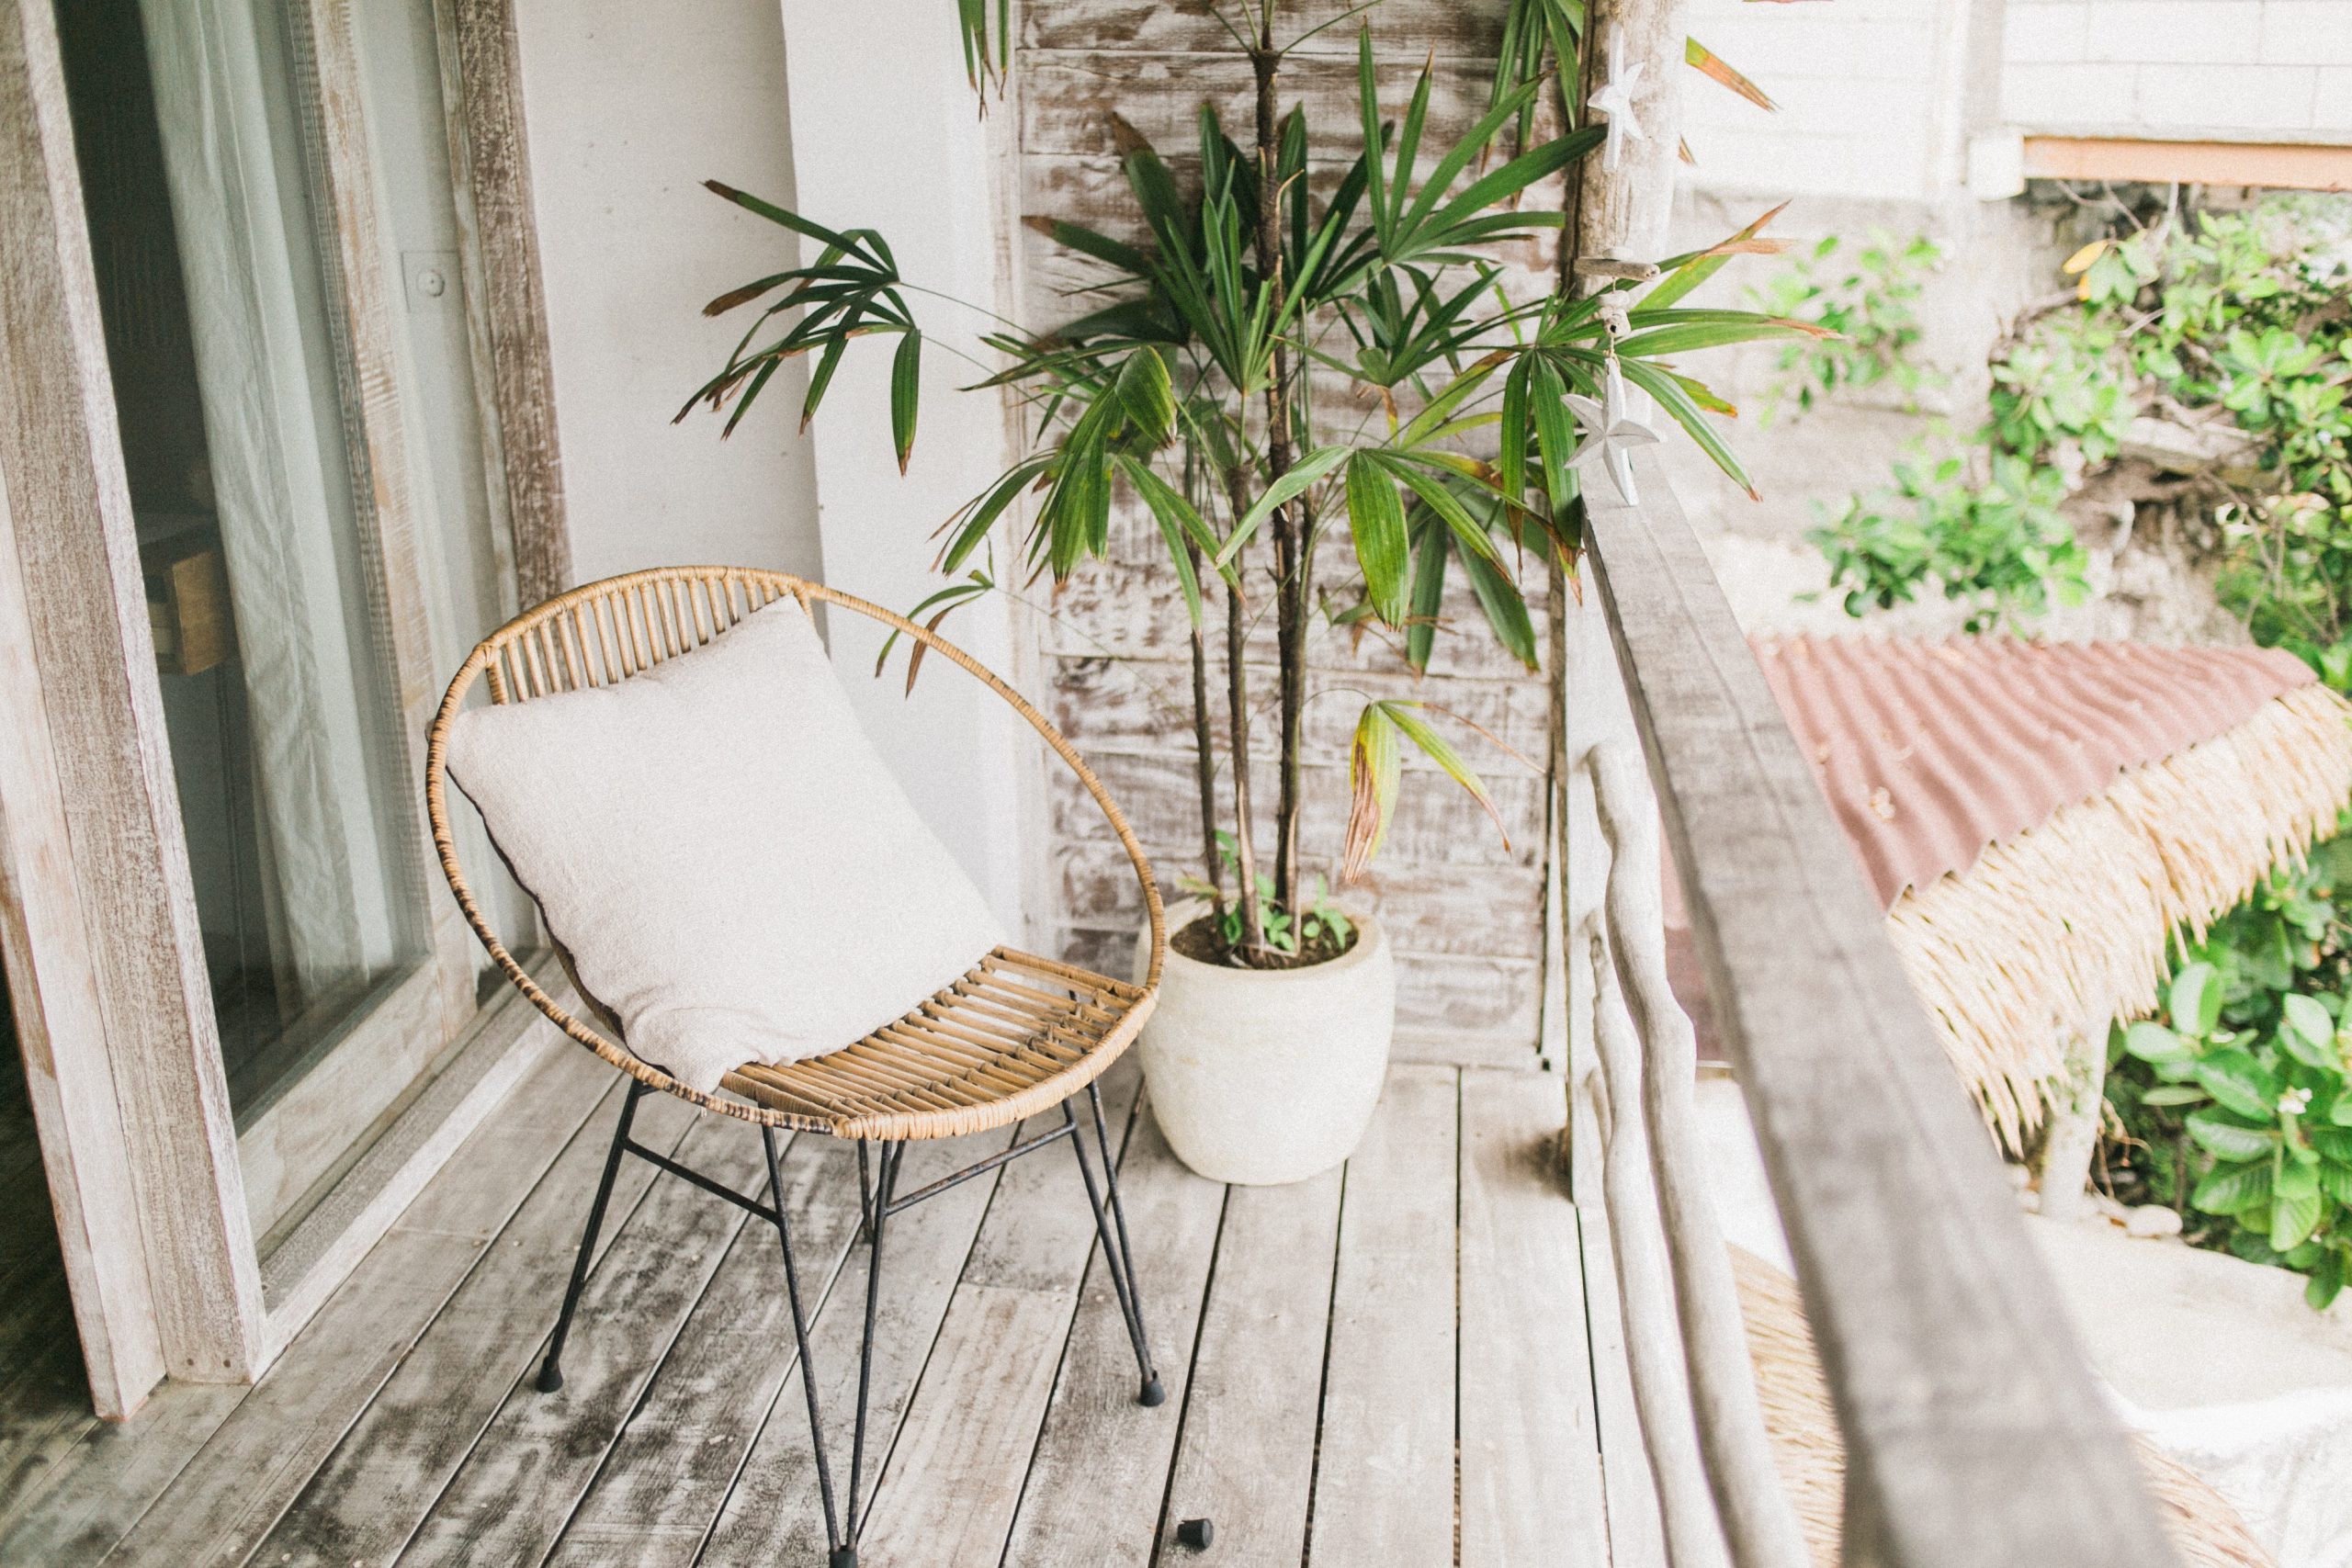 A single garden chair next to a potted plant on a wooden balcony.